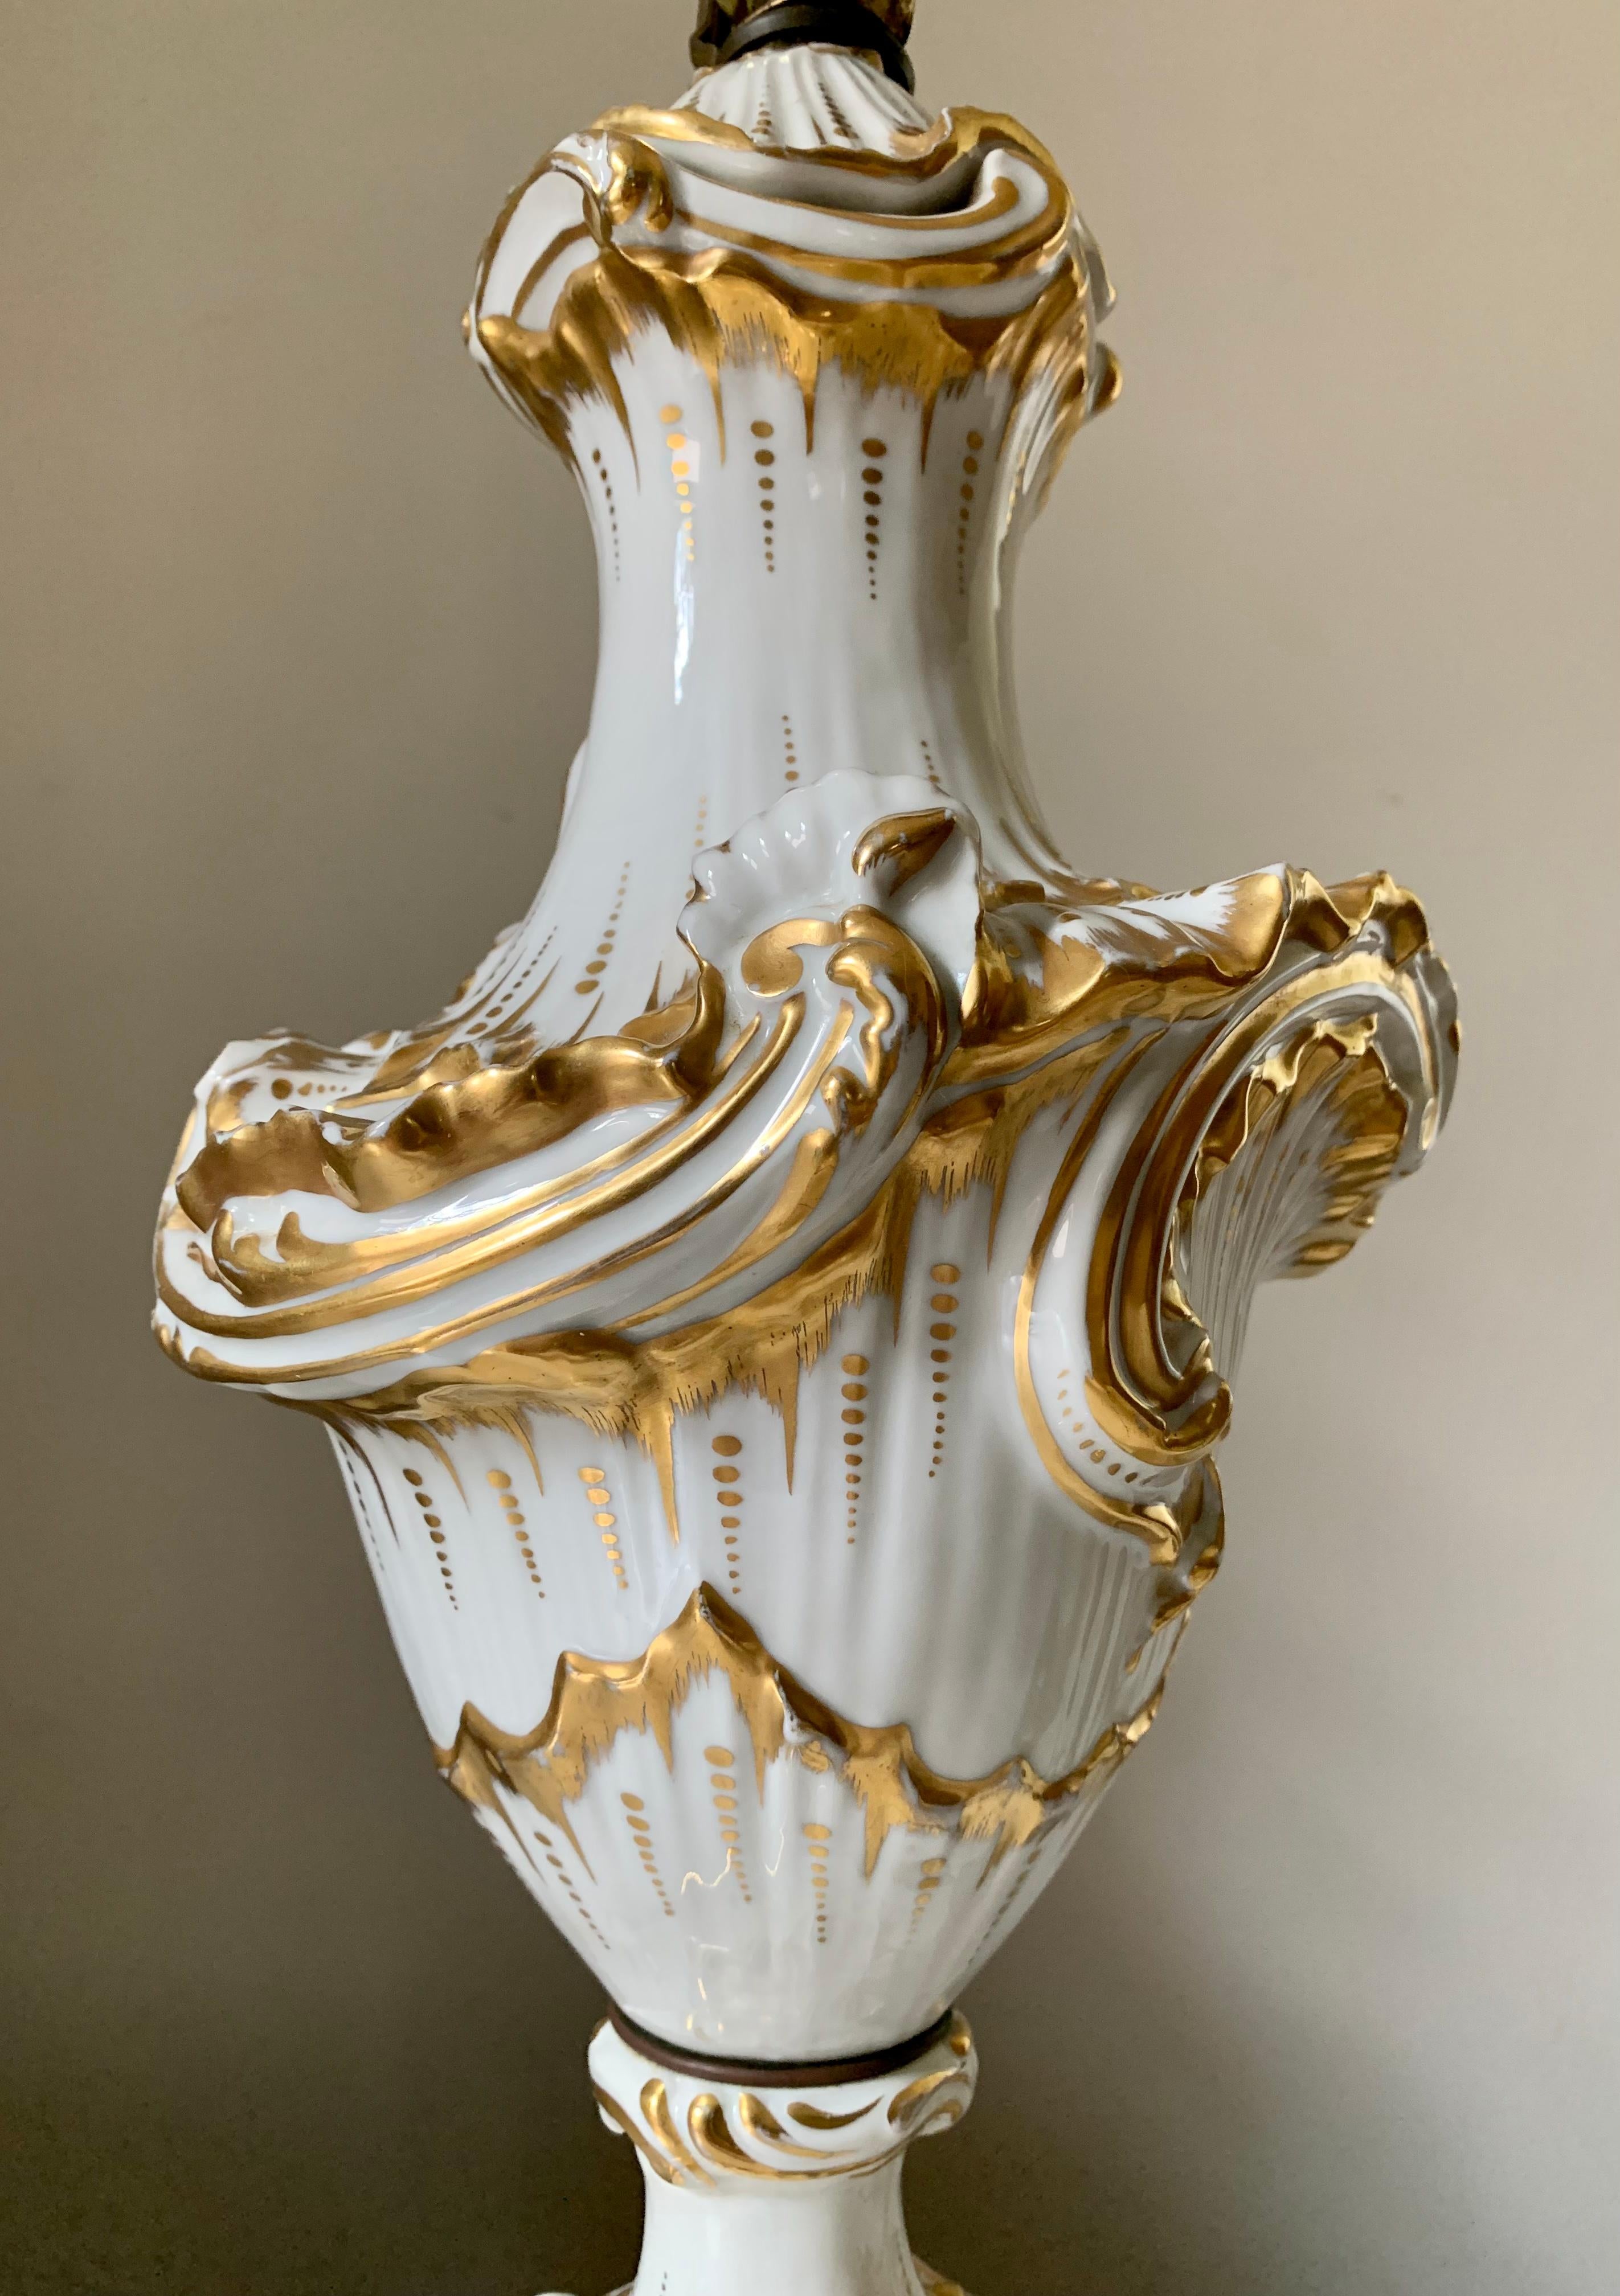 Luminous white and gold porcelain table lamps in the Rococo/ Louis XV style, mounted on Carrara marble bases. Wave upon wave of rocaille decoration highlighted in gold, formerly a pair of covered vases converted into lamps. Fine quality